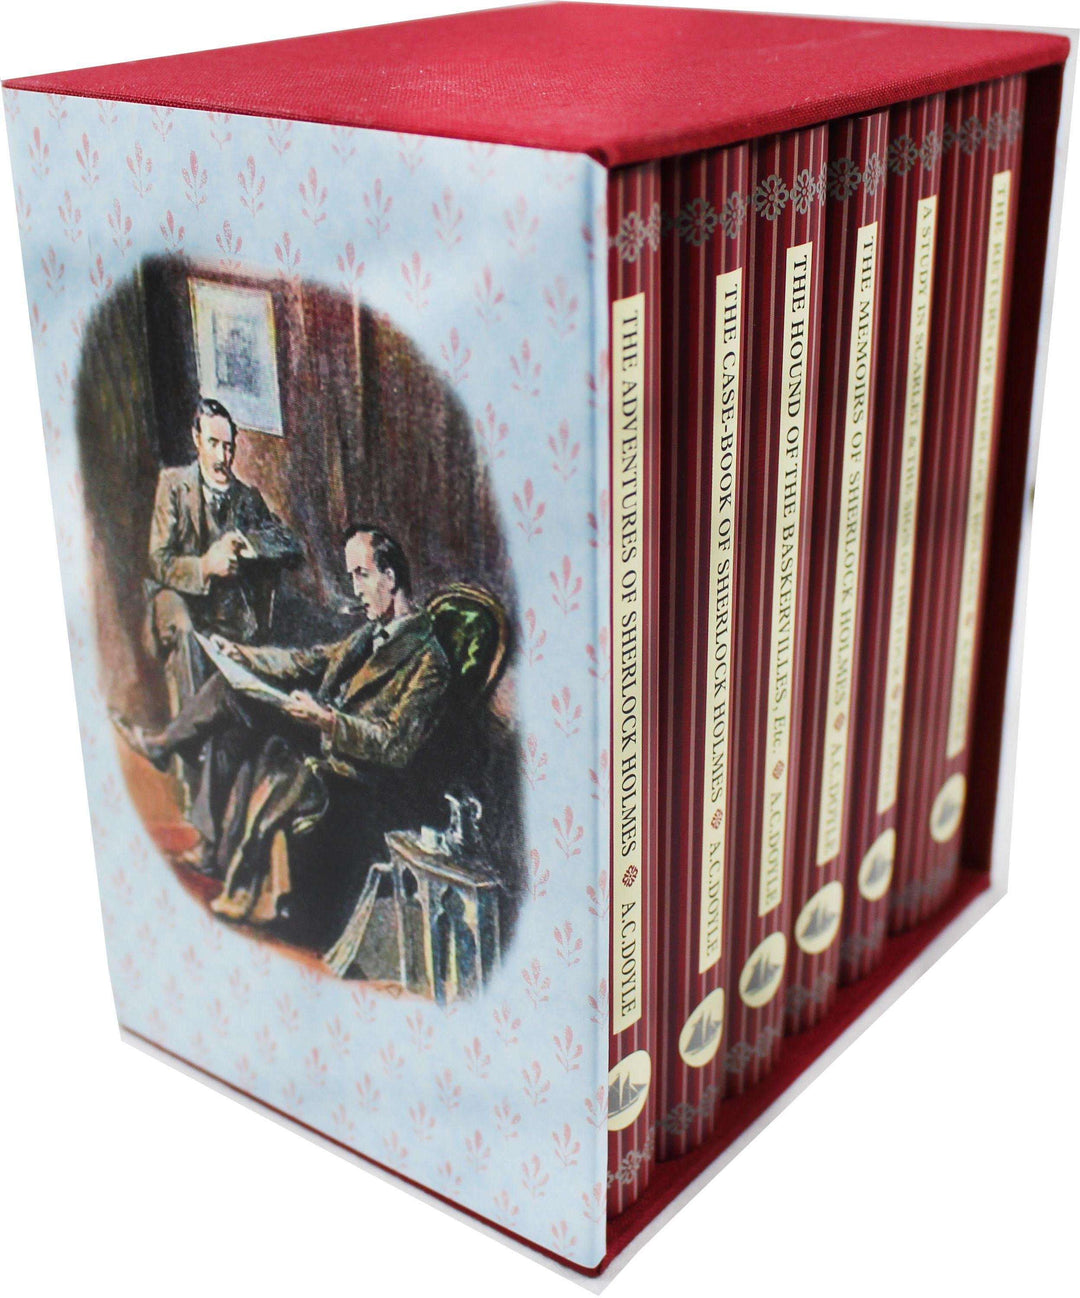 Sherlock Holmes 6 Books Collection - St Stephens Books